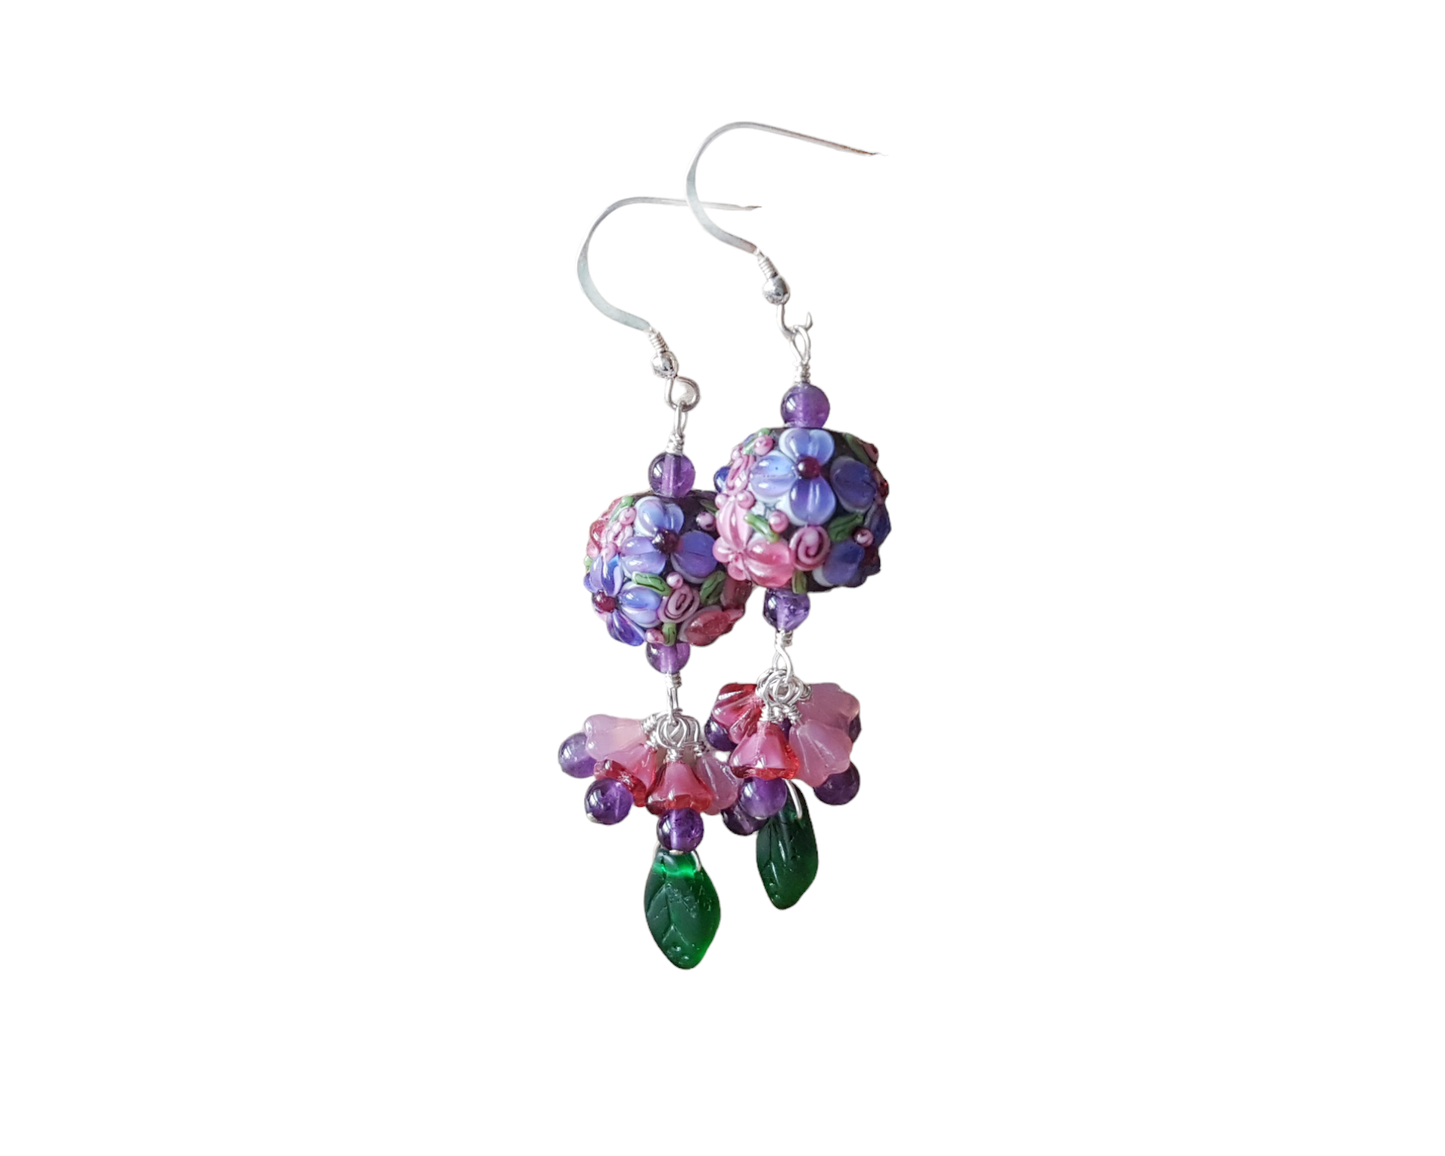 Long Sterling Silver Floral earrings with Amethyst beads, Large Lamprork glass bead and dangling pink flowers and green leaf’s, 